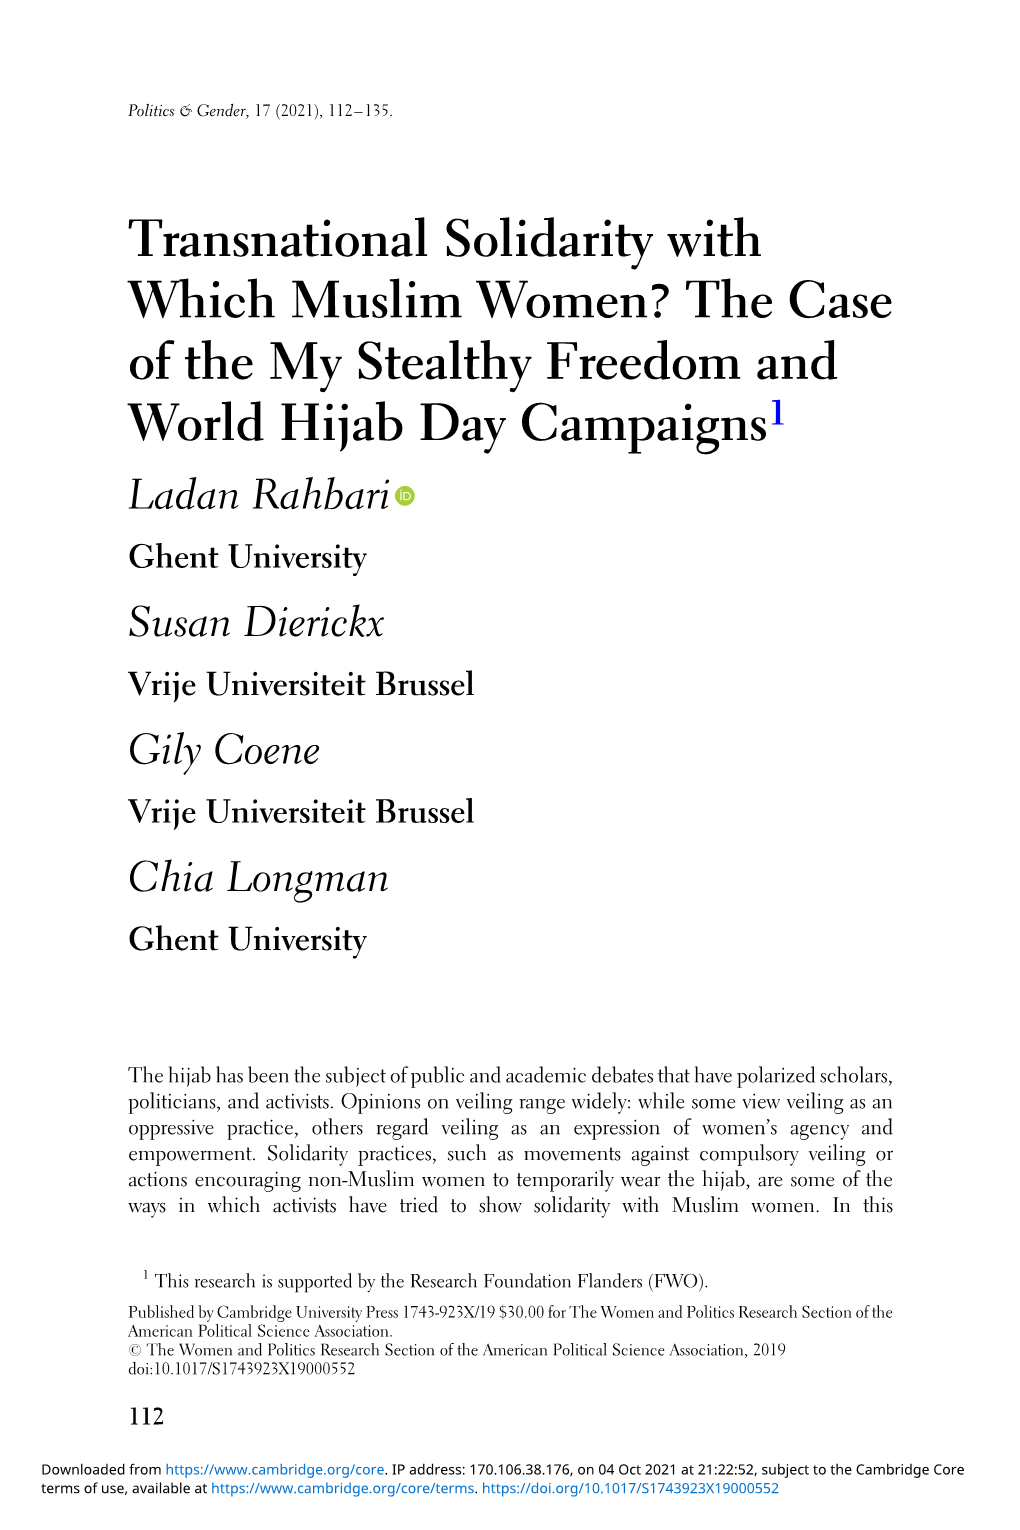 Transnational Solidarity with Which Muslim Women?